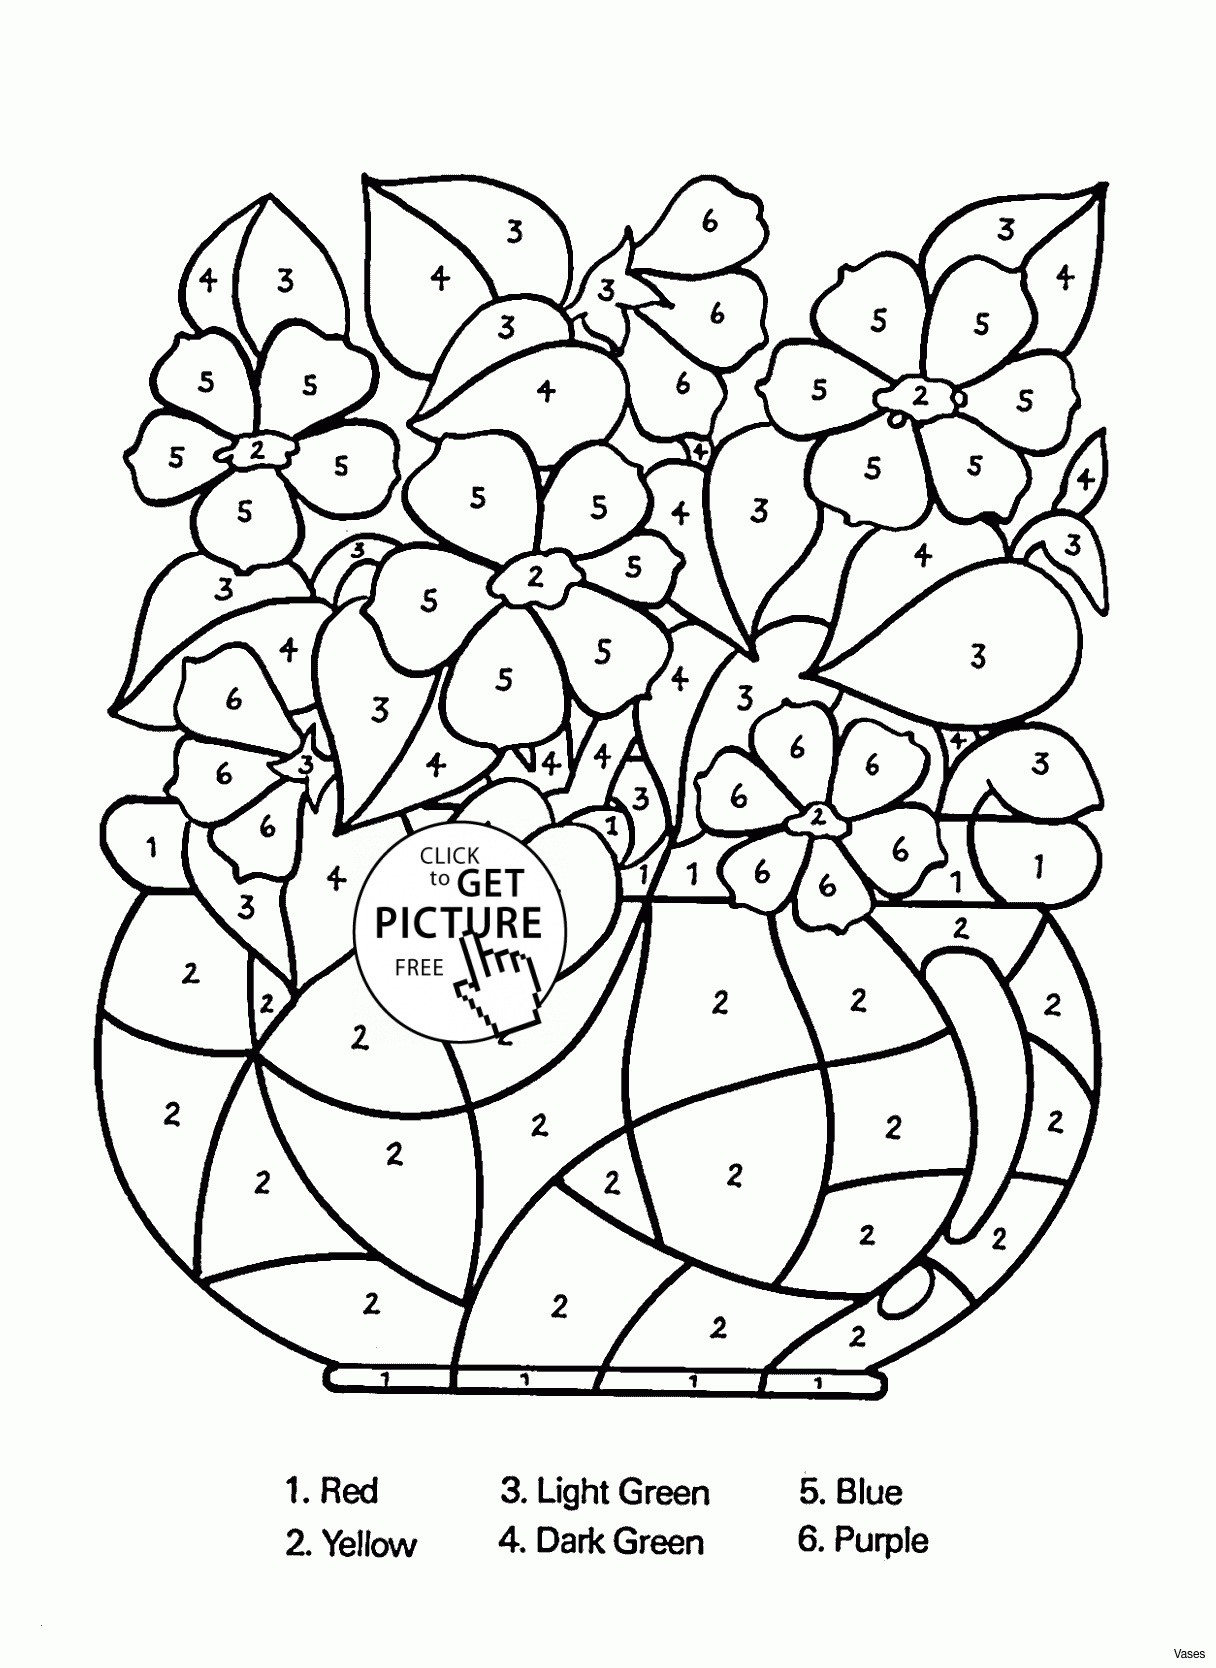 21 Lovely Red Wing Vase 2024 free download red wing vase of african american coloring pages lovely coloring pages for girls regarding african american coloring pages lovely coloring pages for girls lovely printable cds 0d fun time